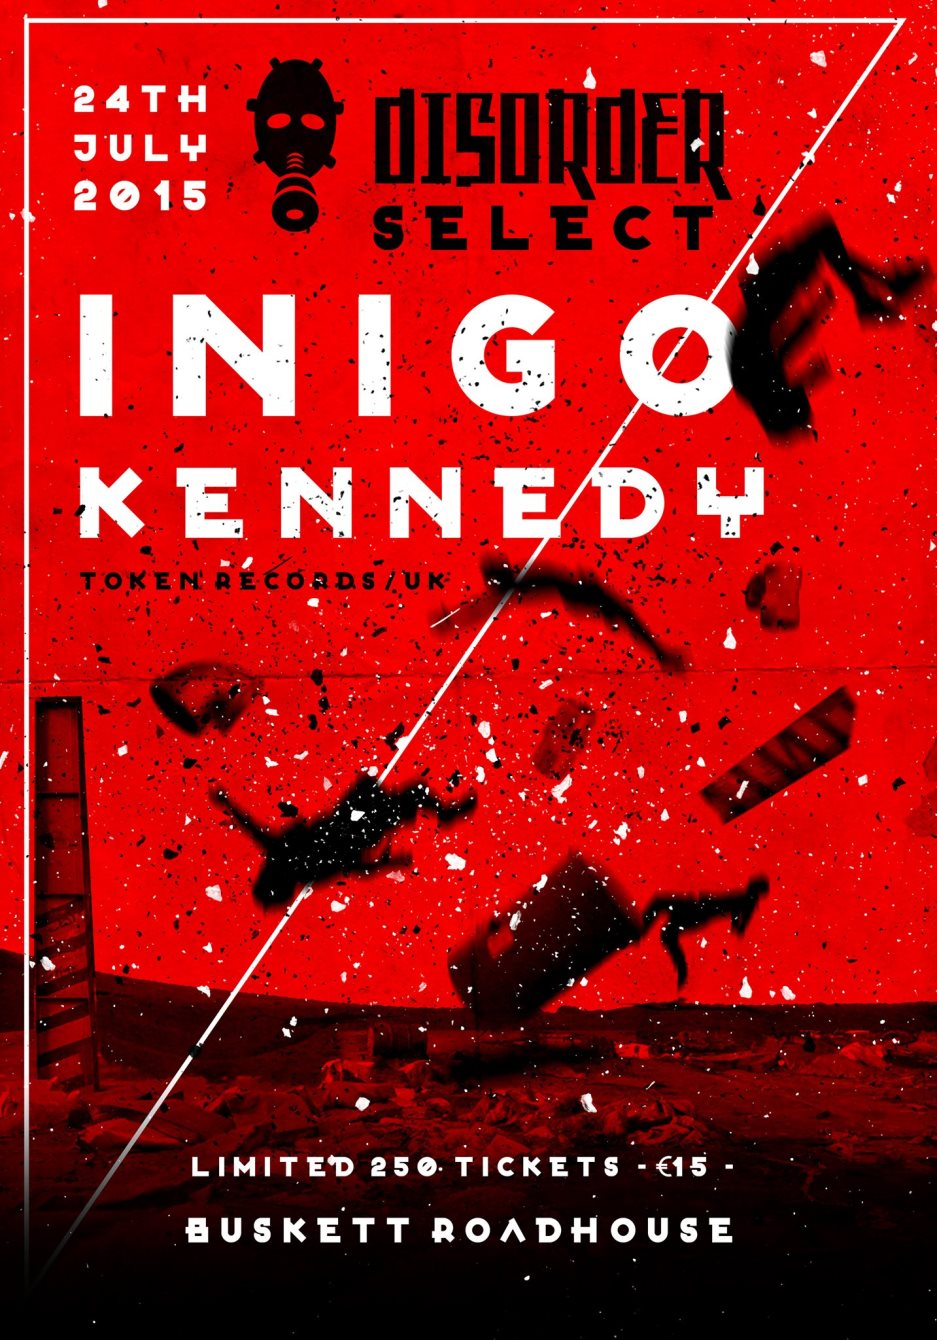 Disorder Select with Inigo Kennedy - Flyer front